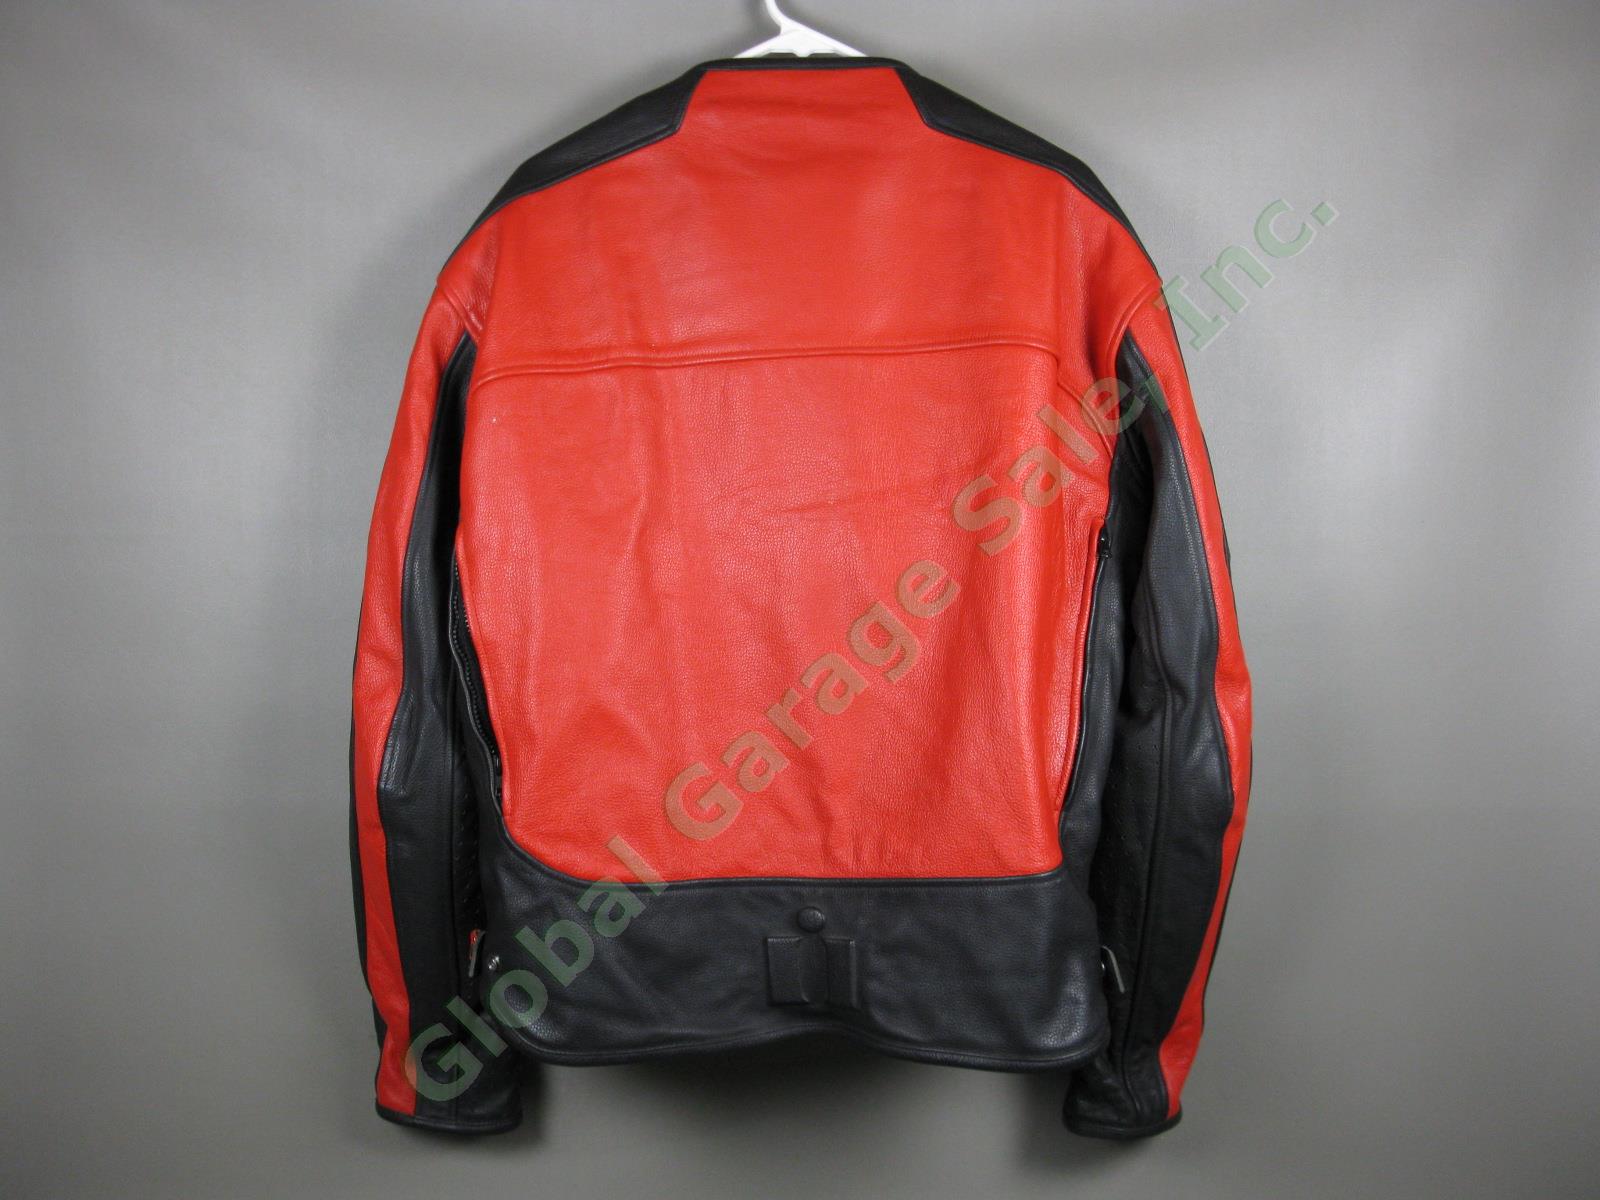 Mens Icon Motorhead Red/Black Leather Motorcycle Jacket +Armor Pad Liner L 44-46 2